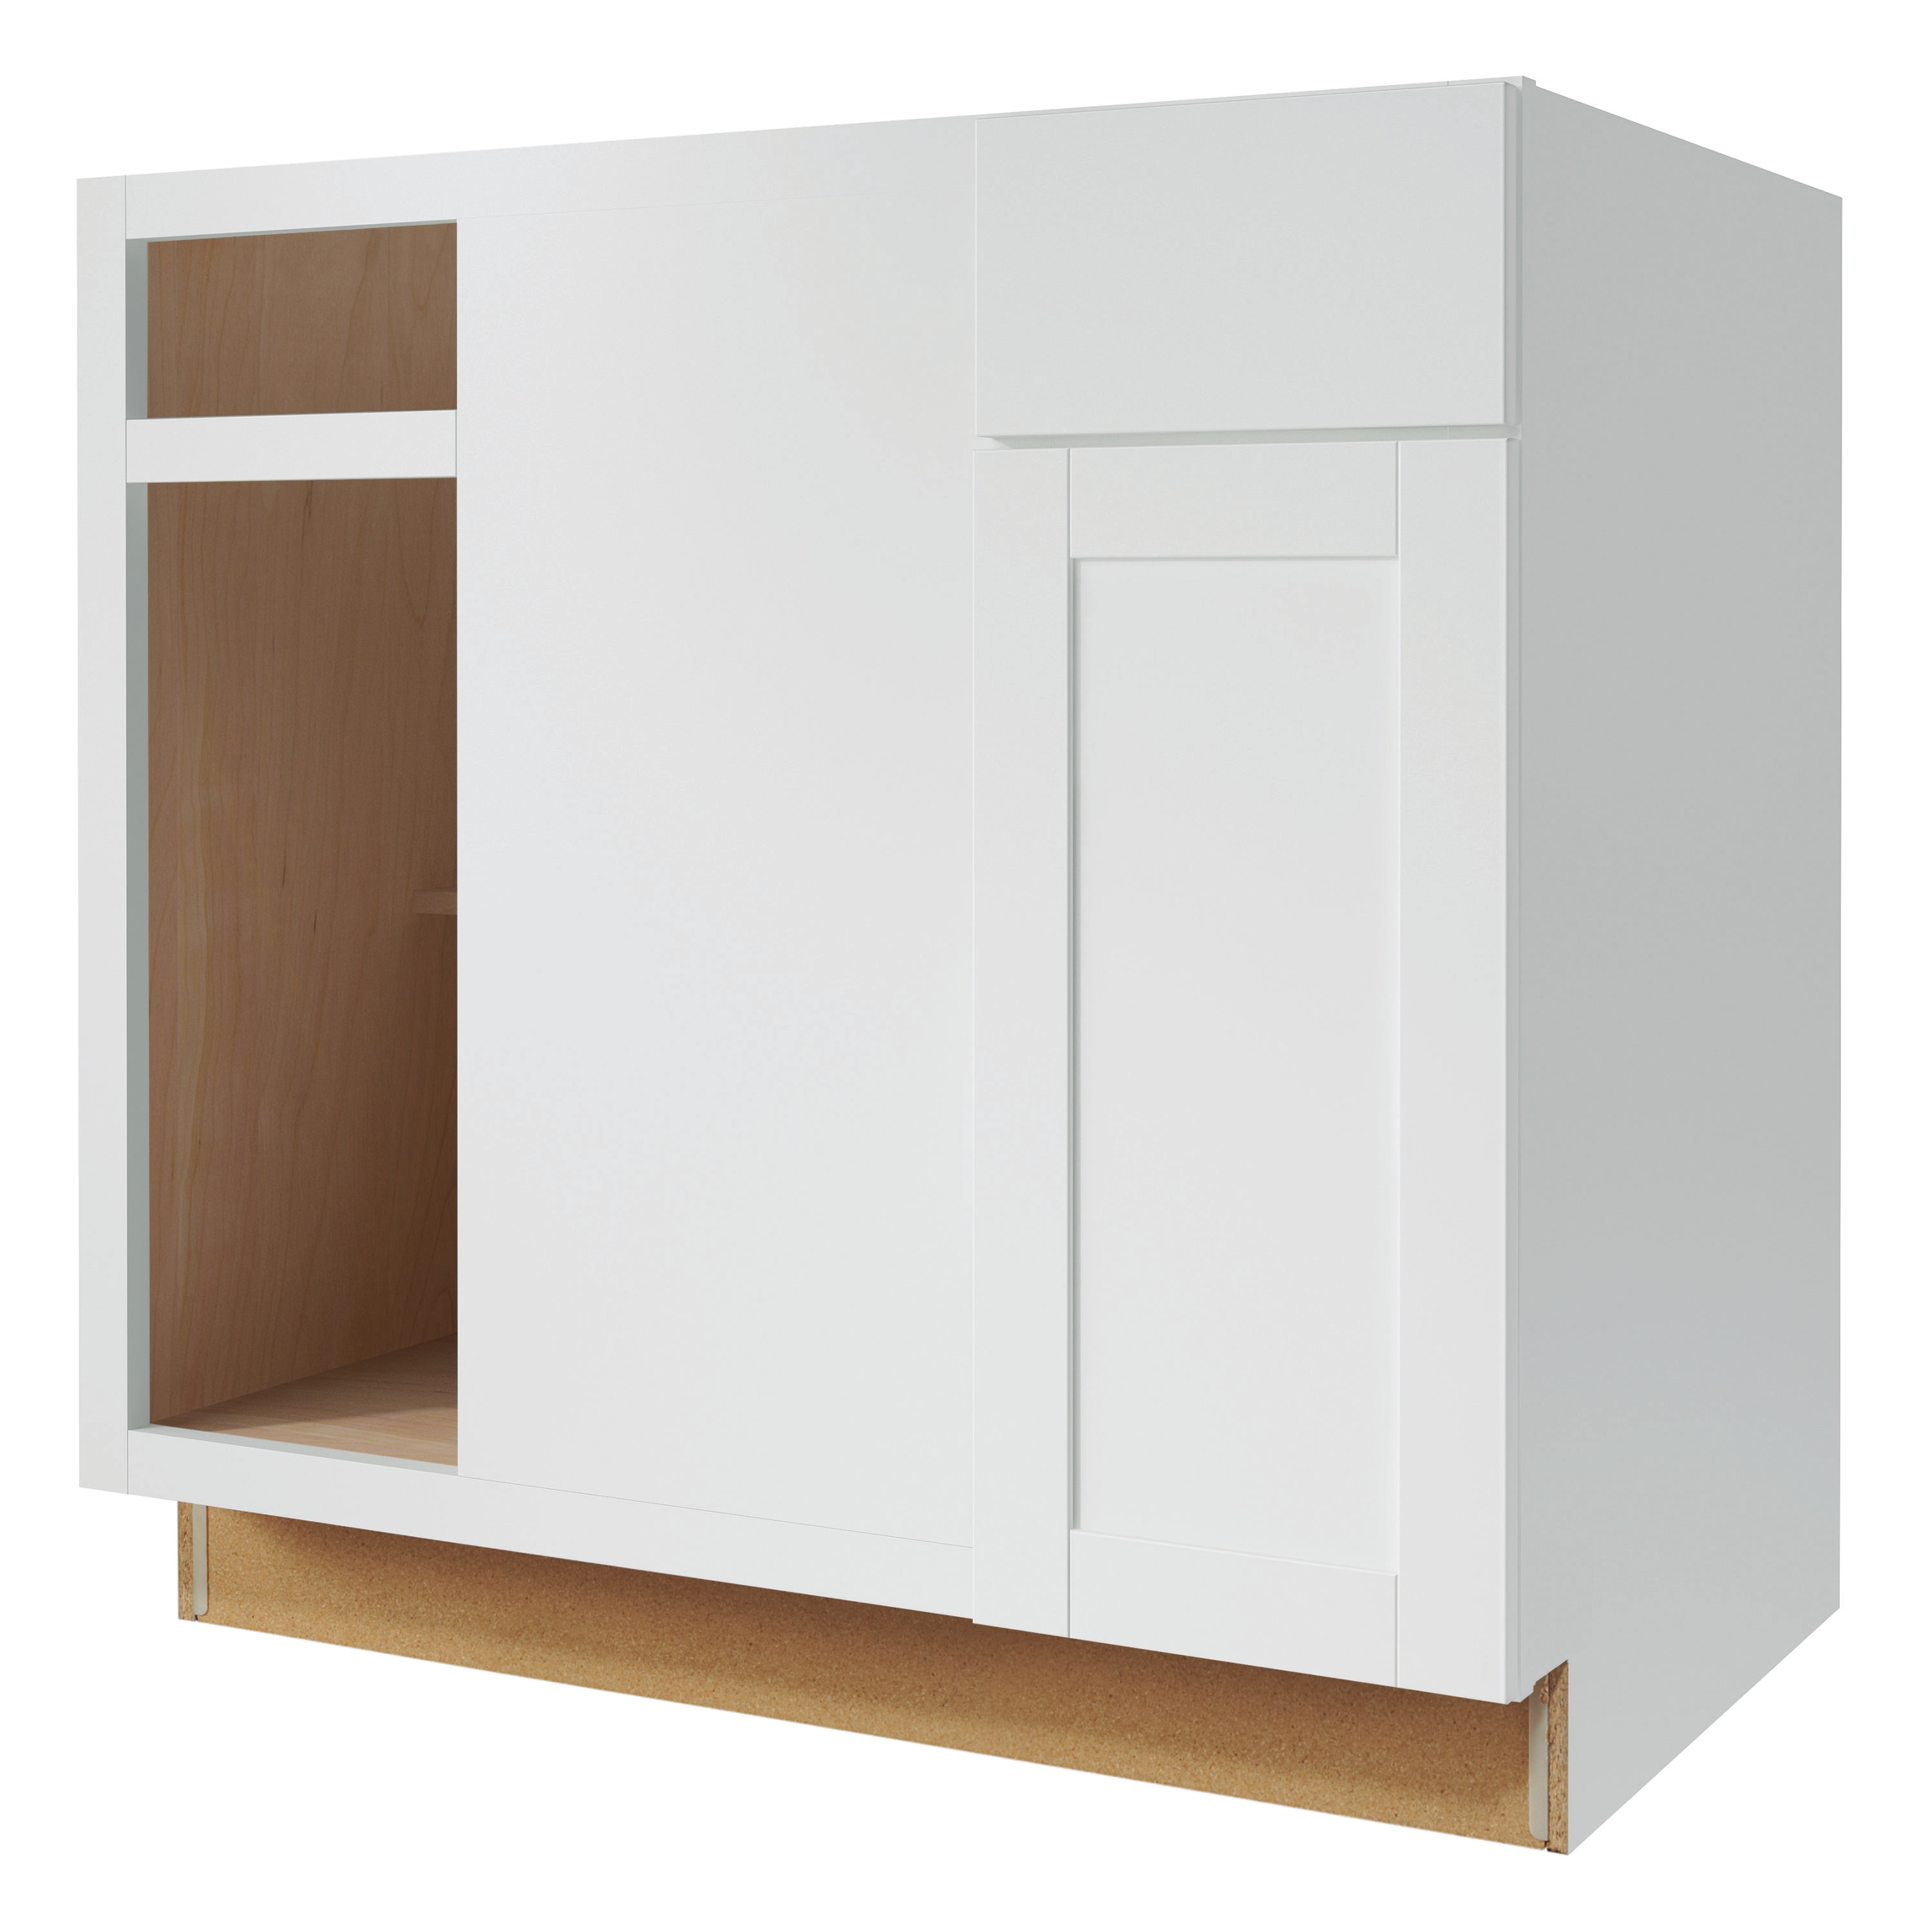 Diamond Now Arcadia 36 In W X 35 H 23 75 D White Blind Corner Base Fully Assembled Cabinet Recessed Panel Shaker Door Style The Kitchen Cabinets Department At Lowes Com